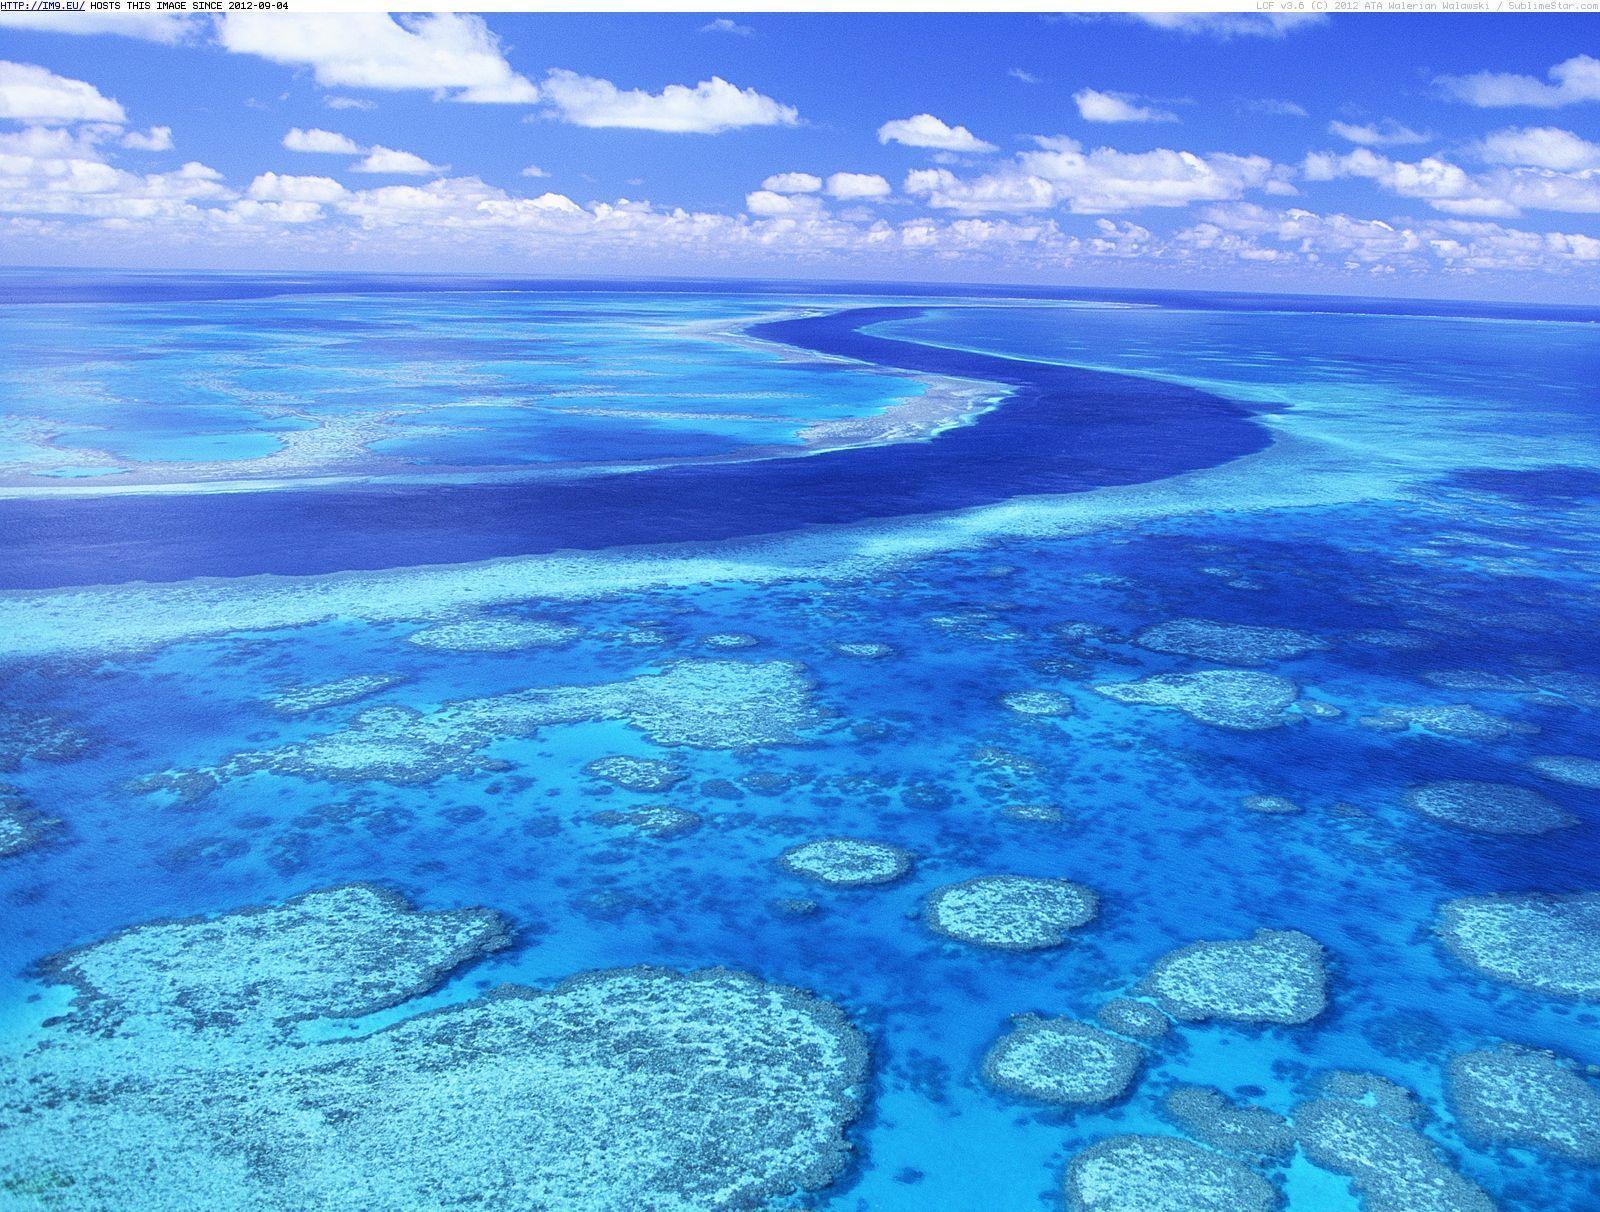 The Great Barrier Reef Wallpaper HD Wallpaper Picture. Tourist